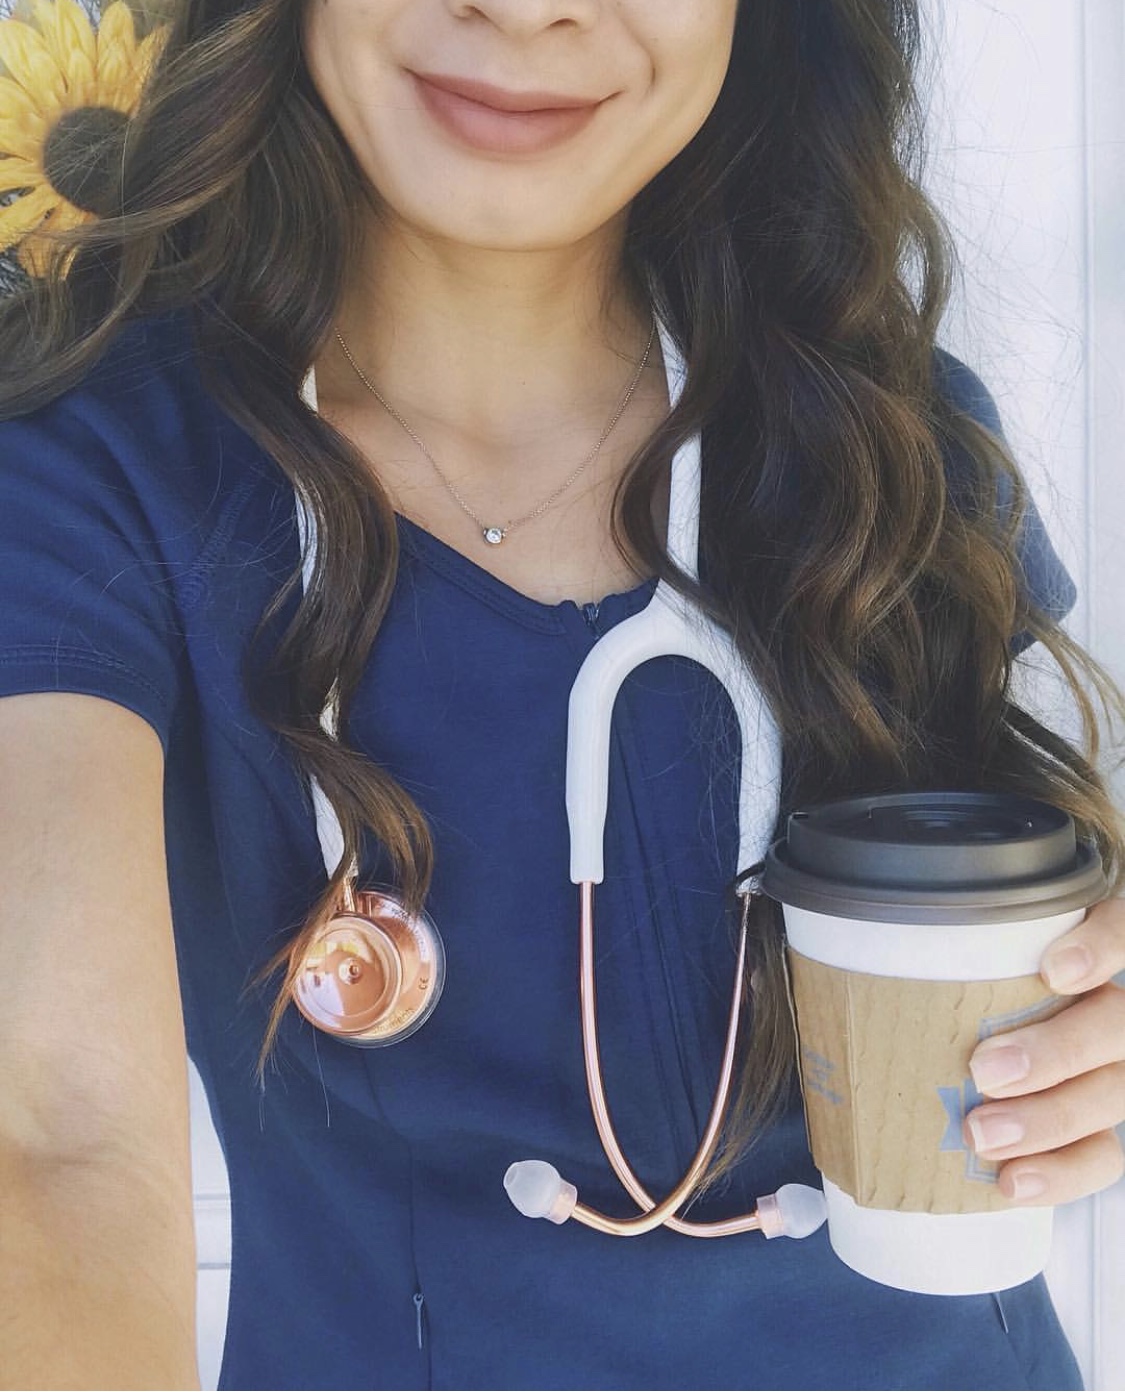 5 Top Things I Wish I Knew Before Starting Medical School